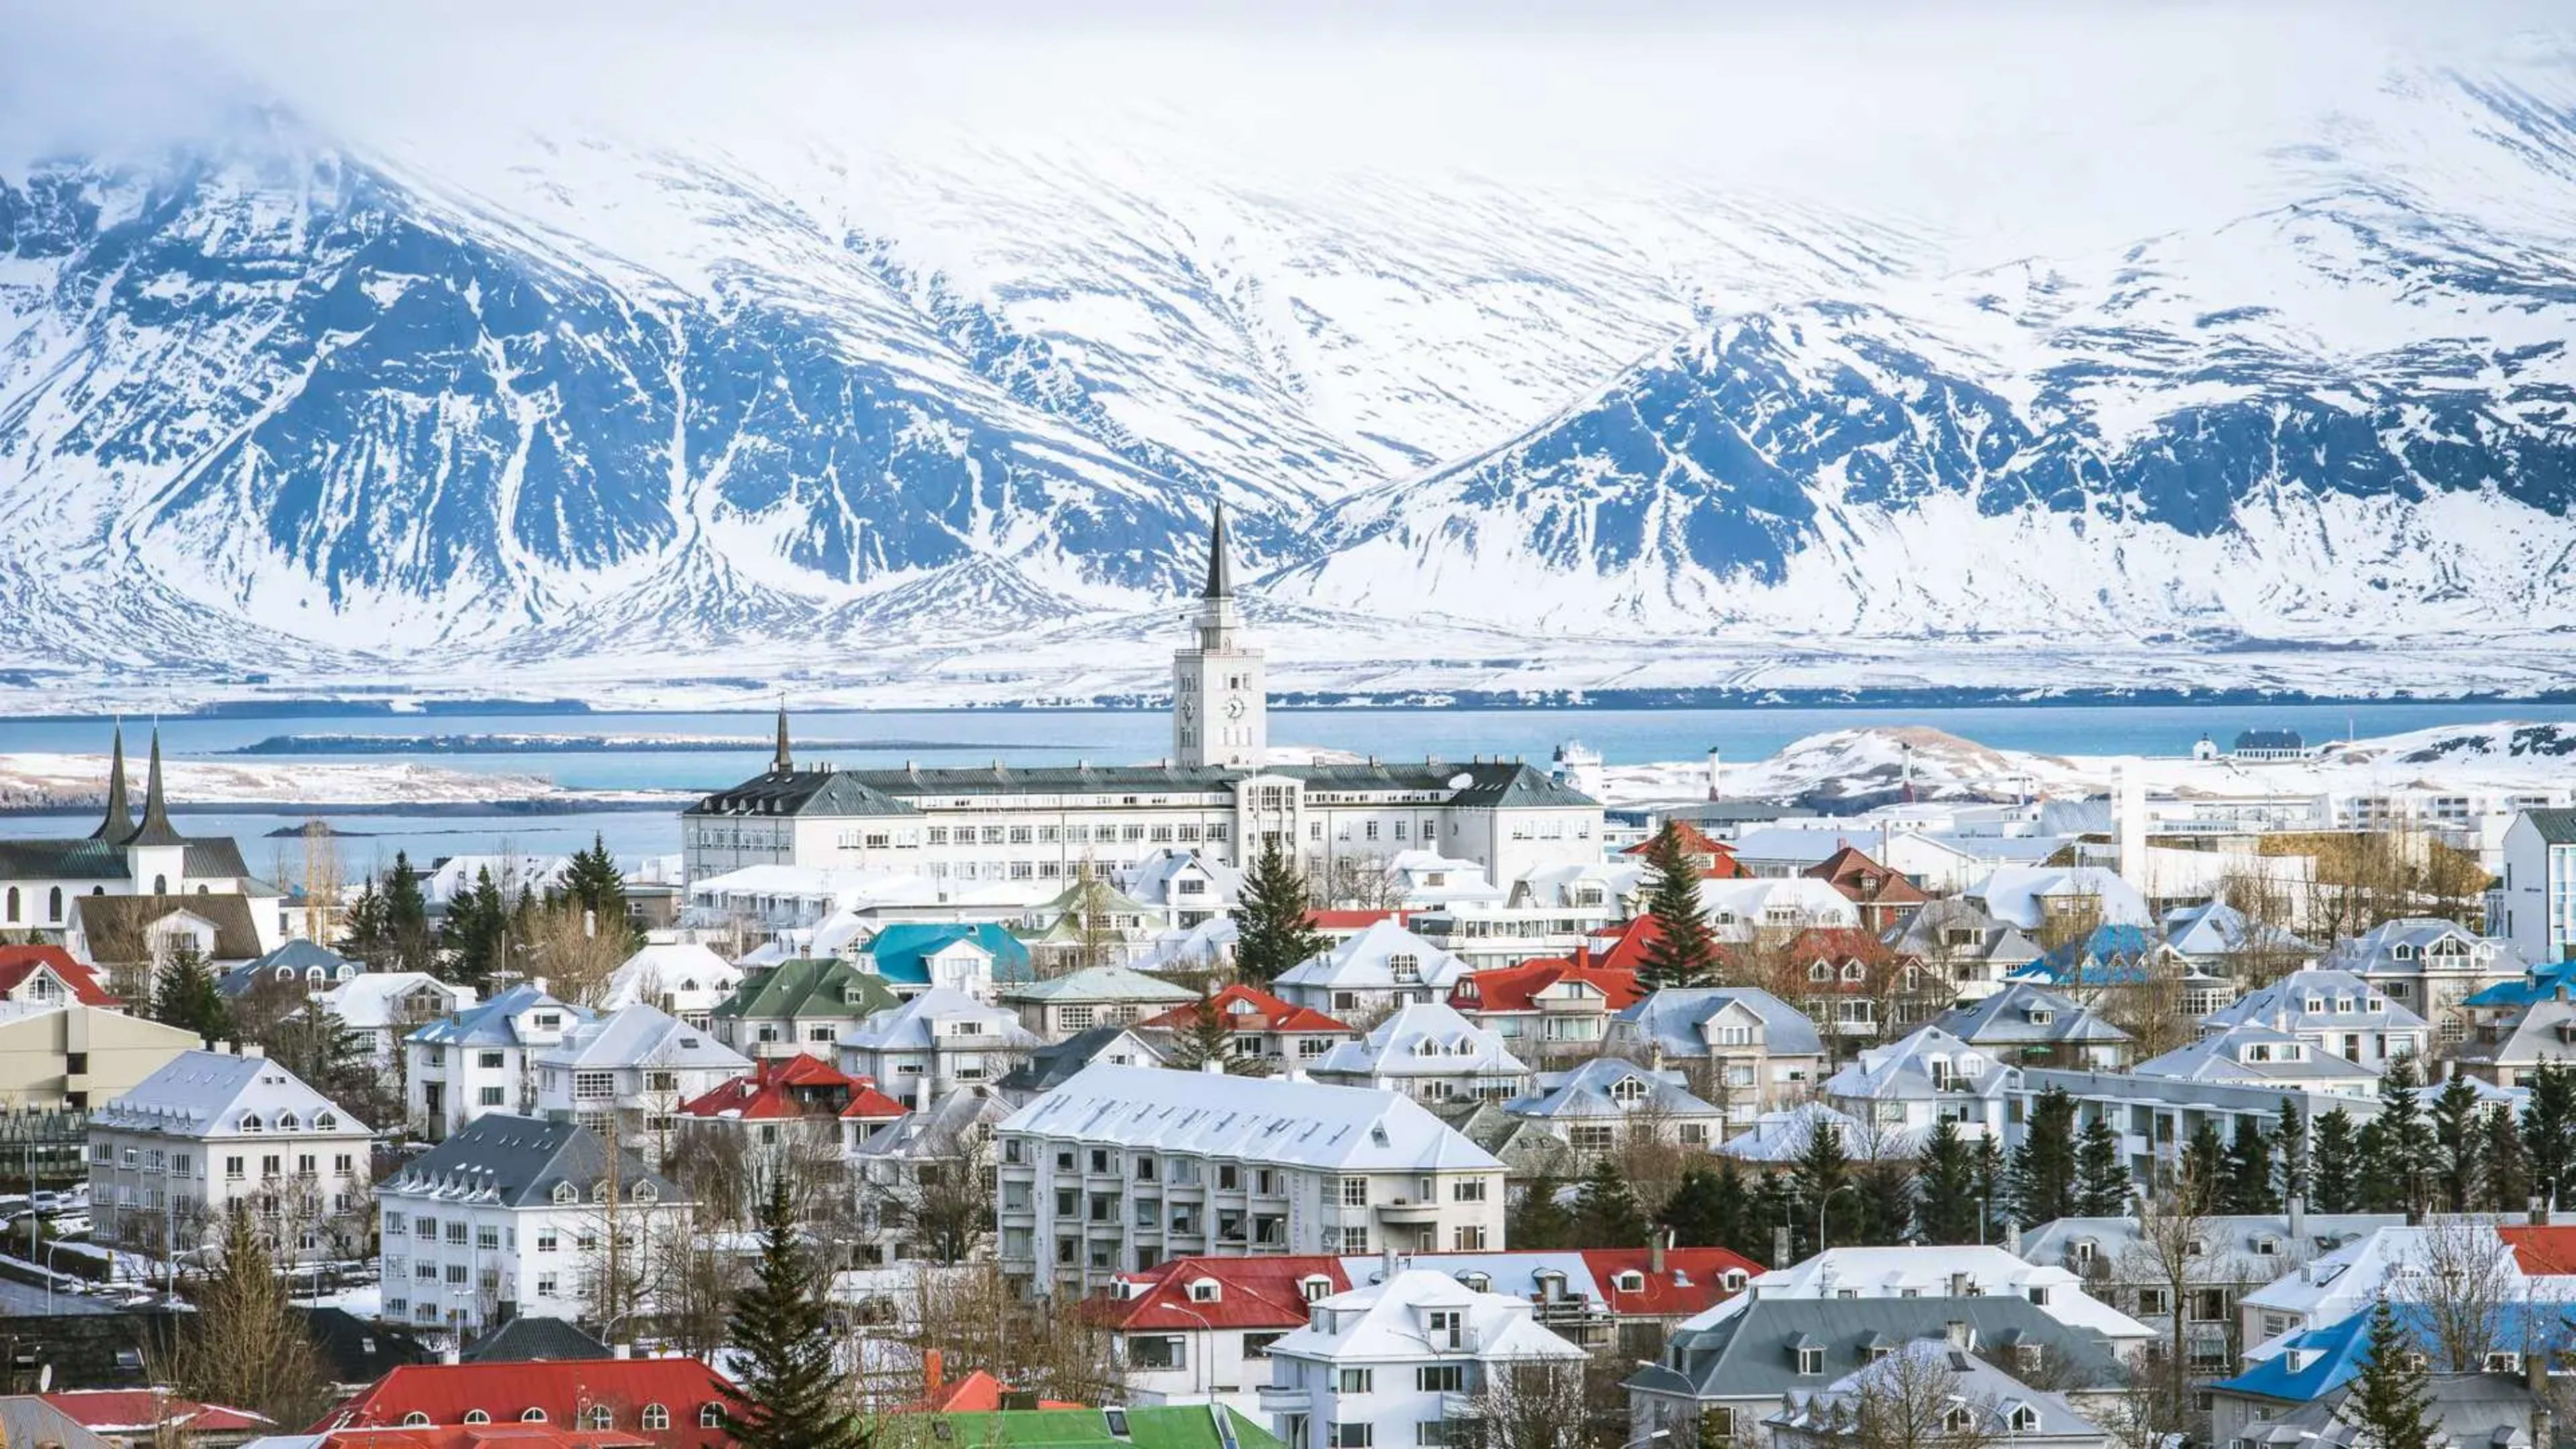 Reykjavik and Mount Esja covered in snow